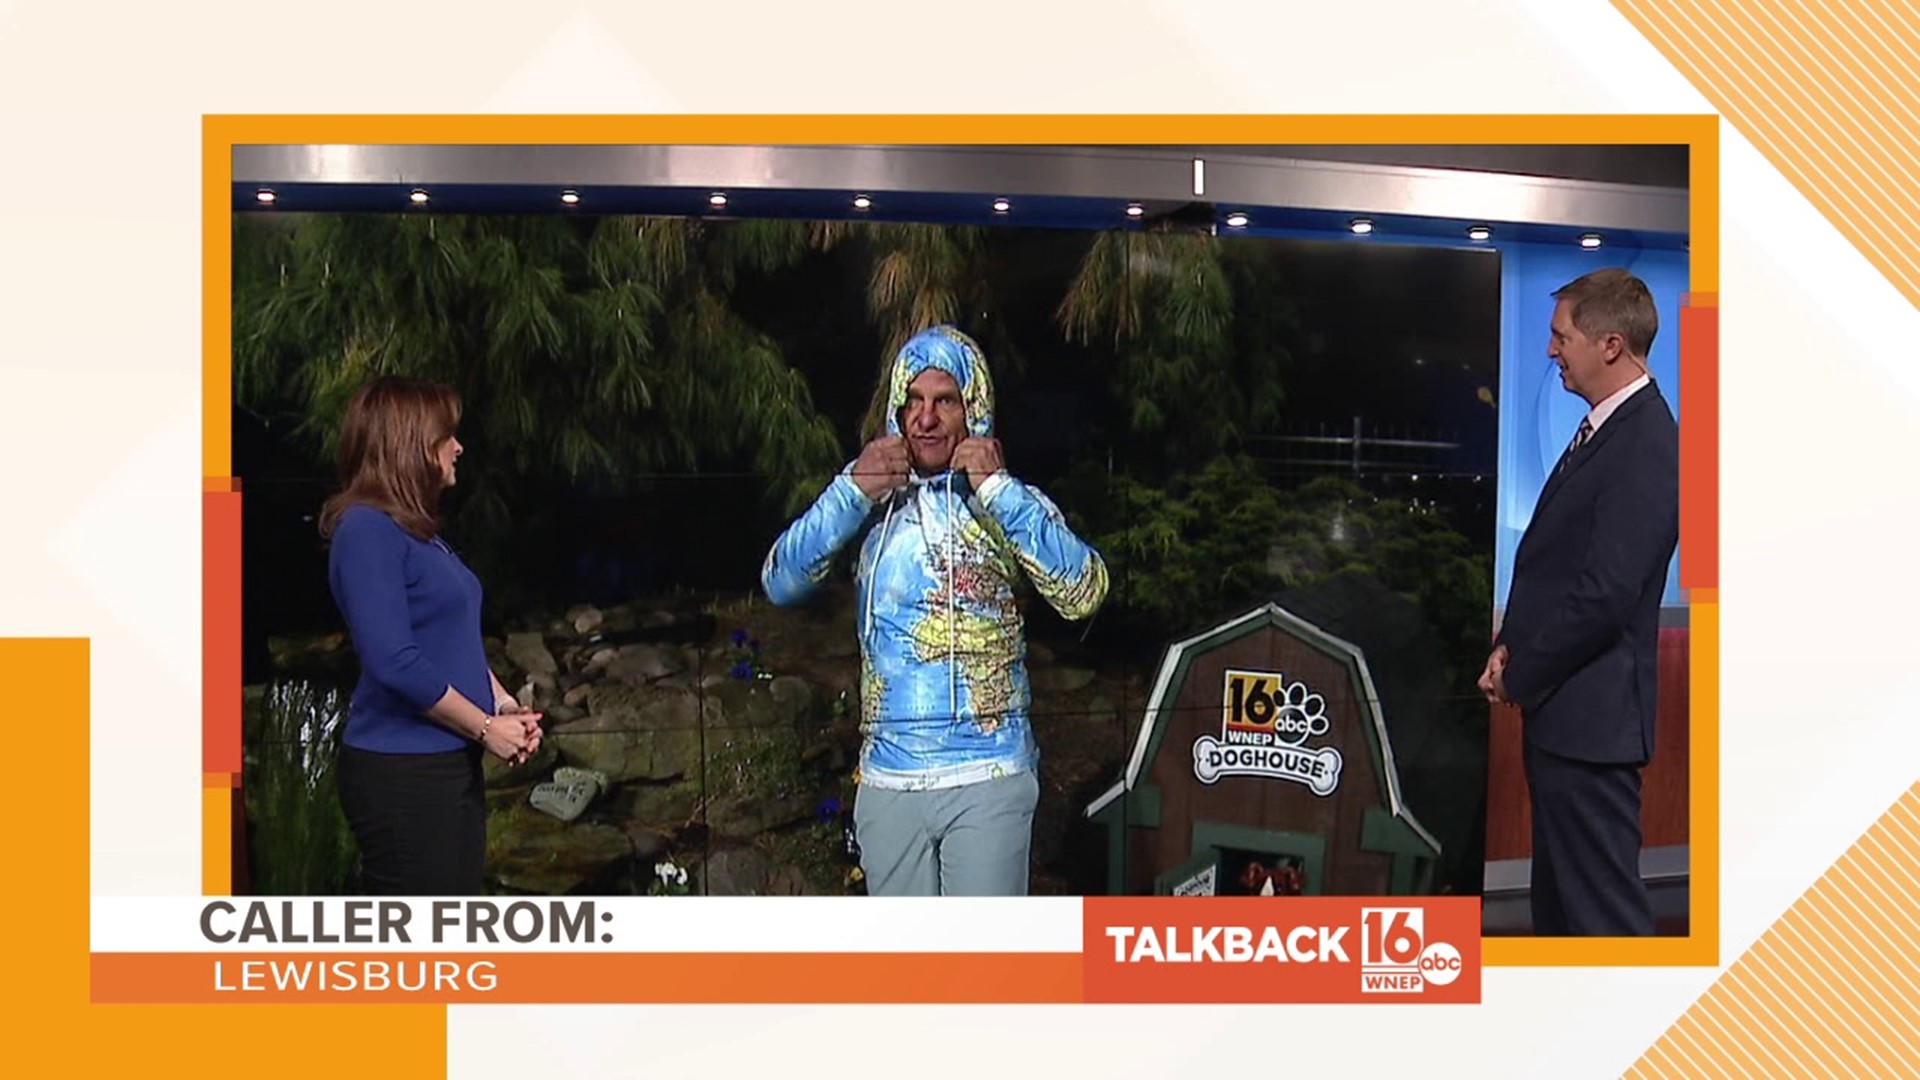 Callers are commenting on the Newswatch 16 Team's attire as well as several other topics in this Talkback 16.